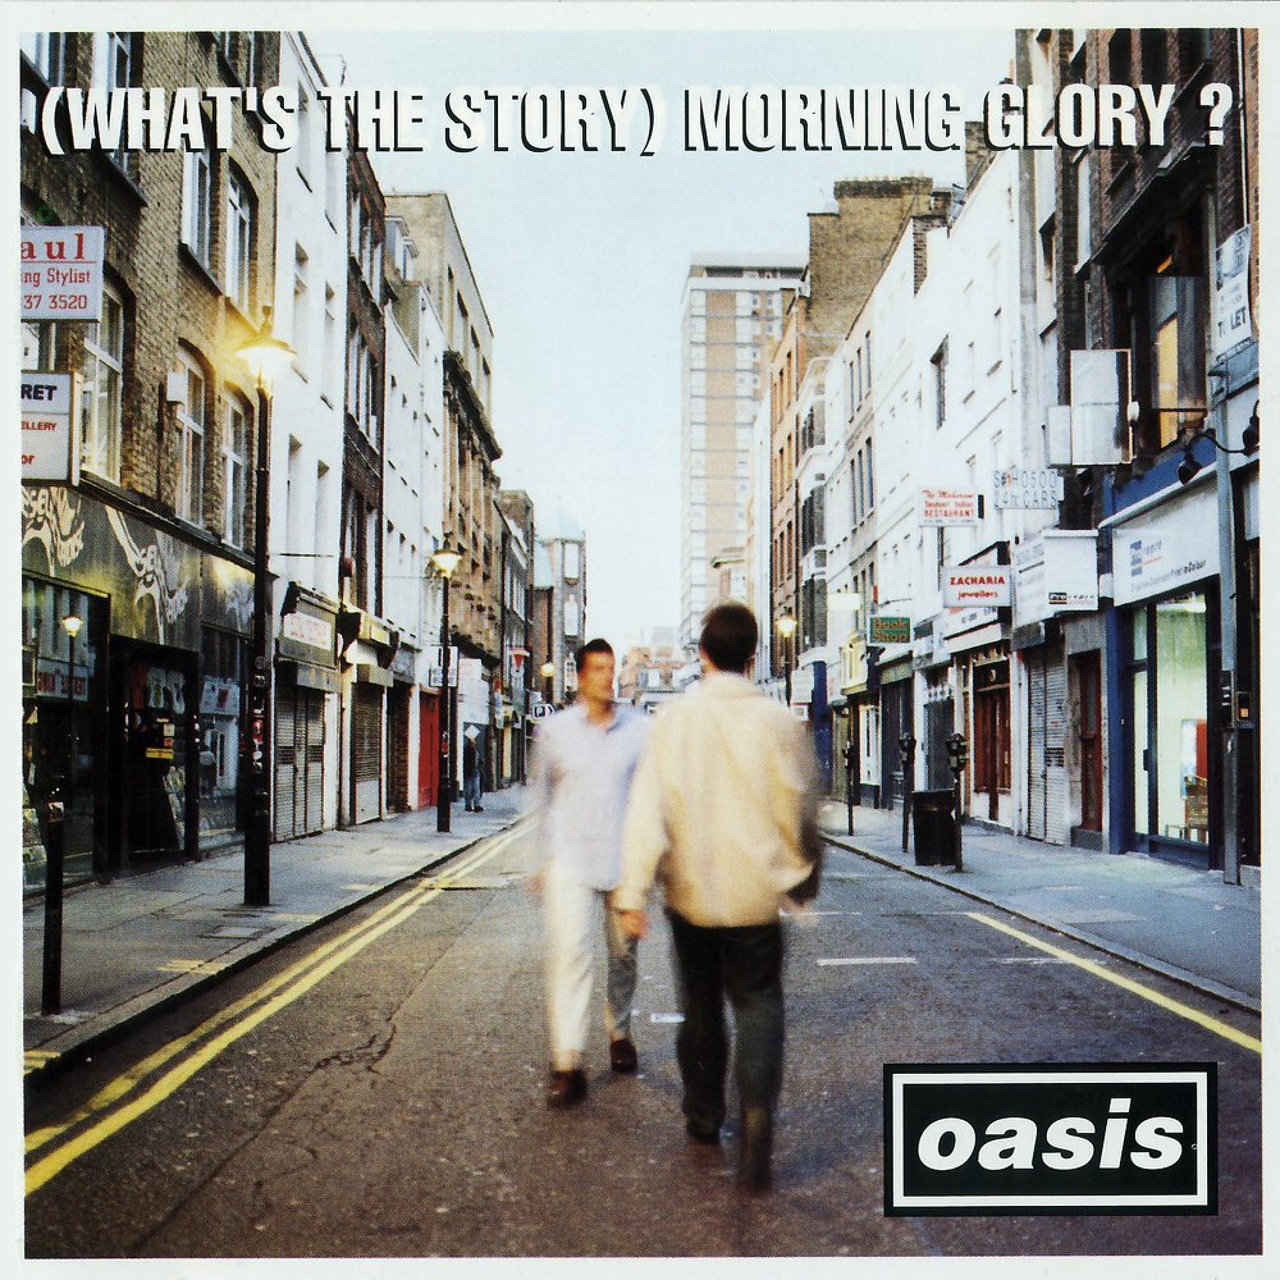 Oasis Morning Glory album cover